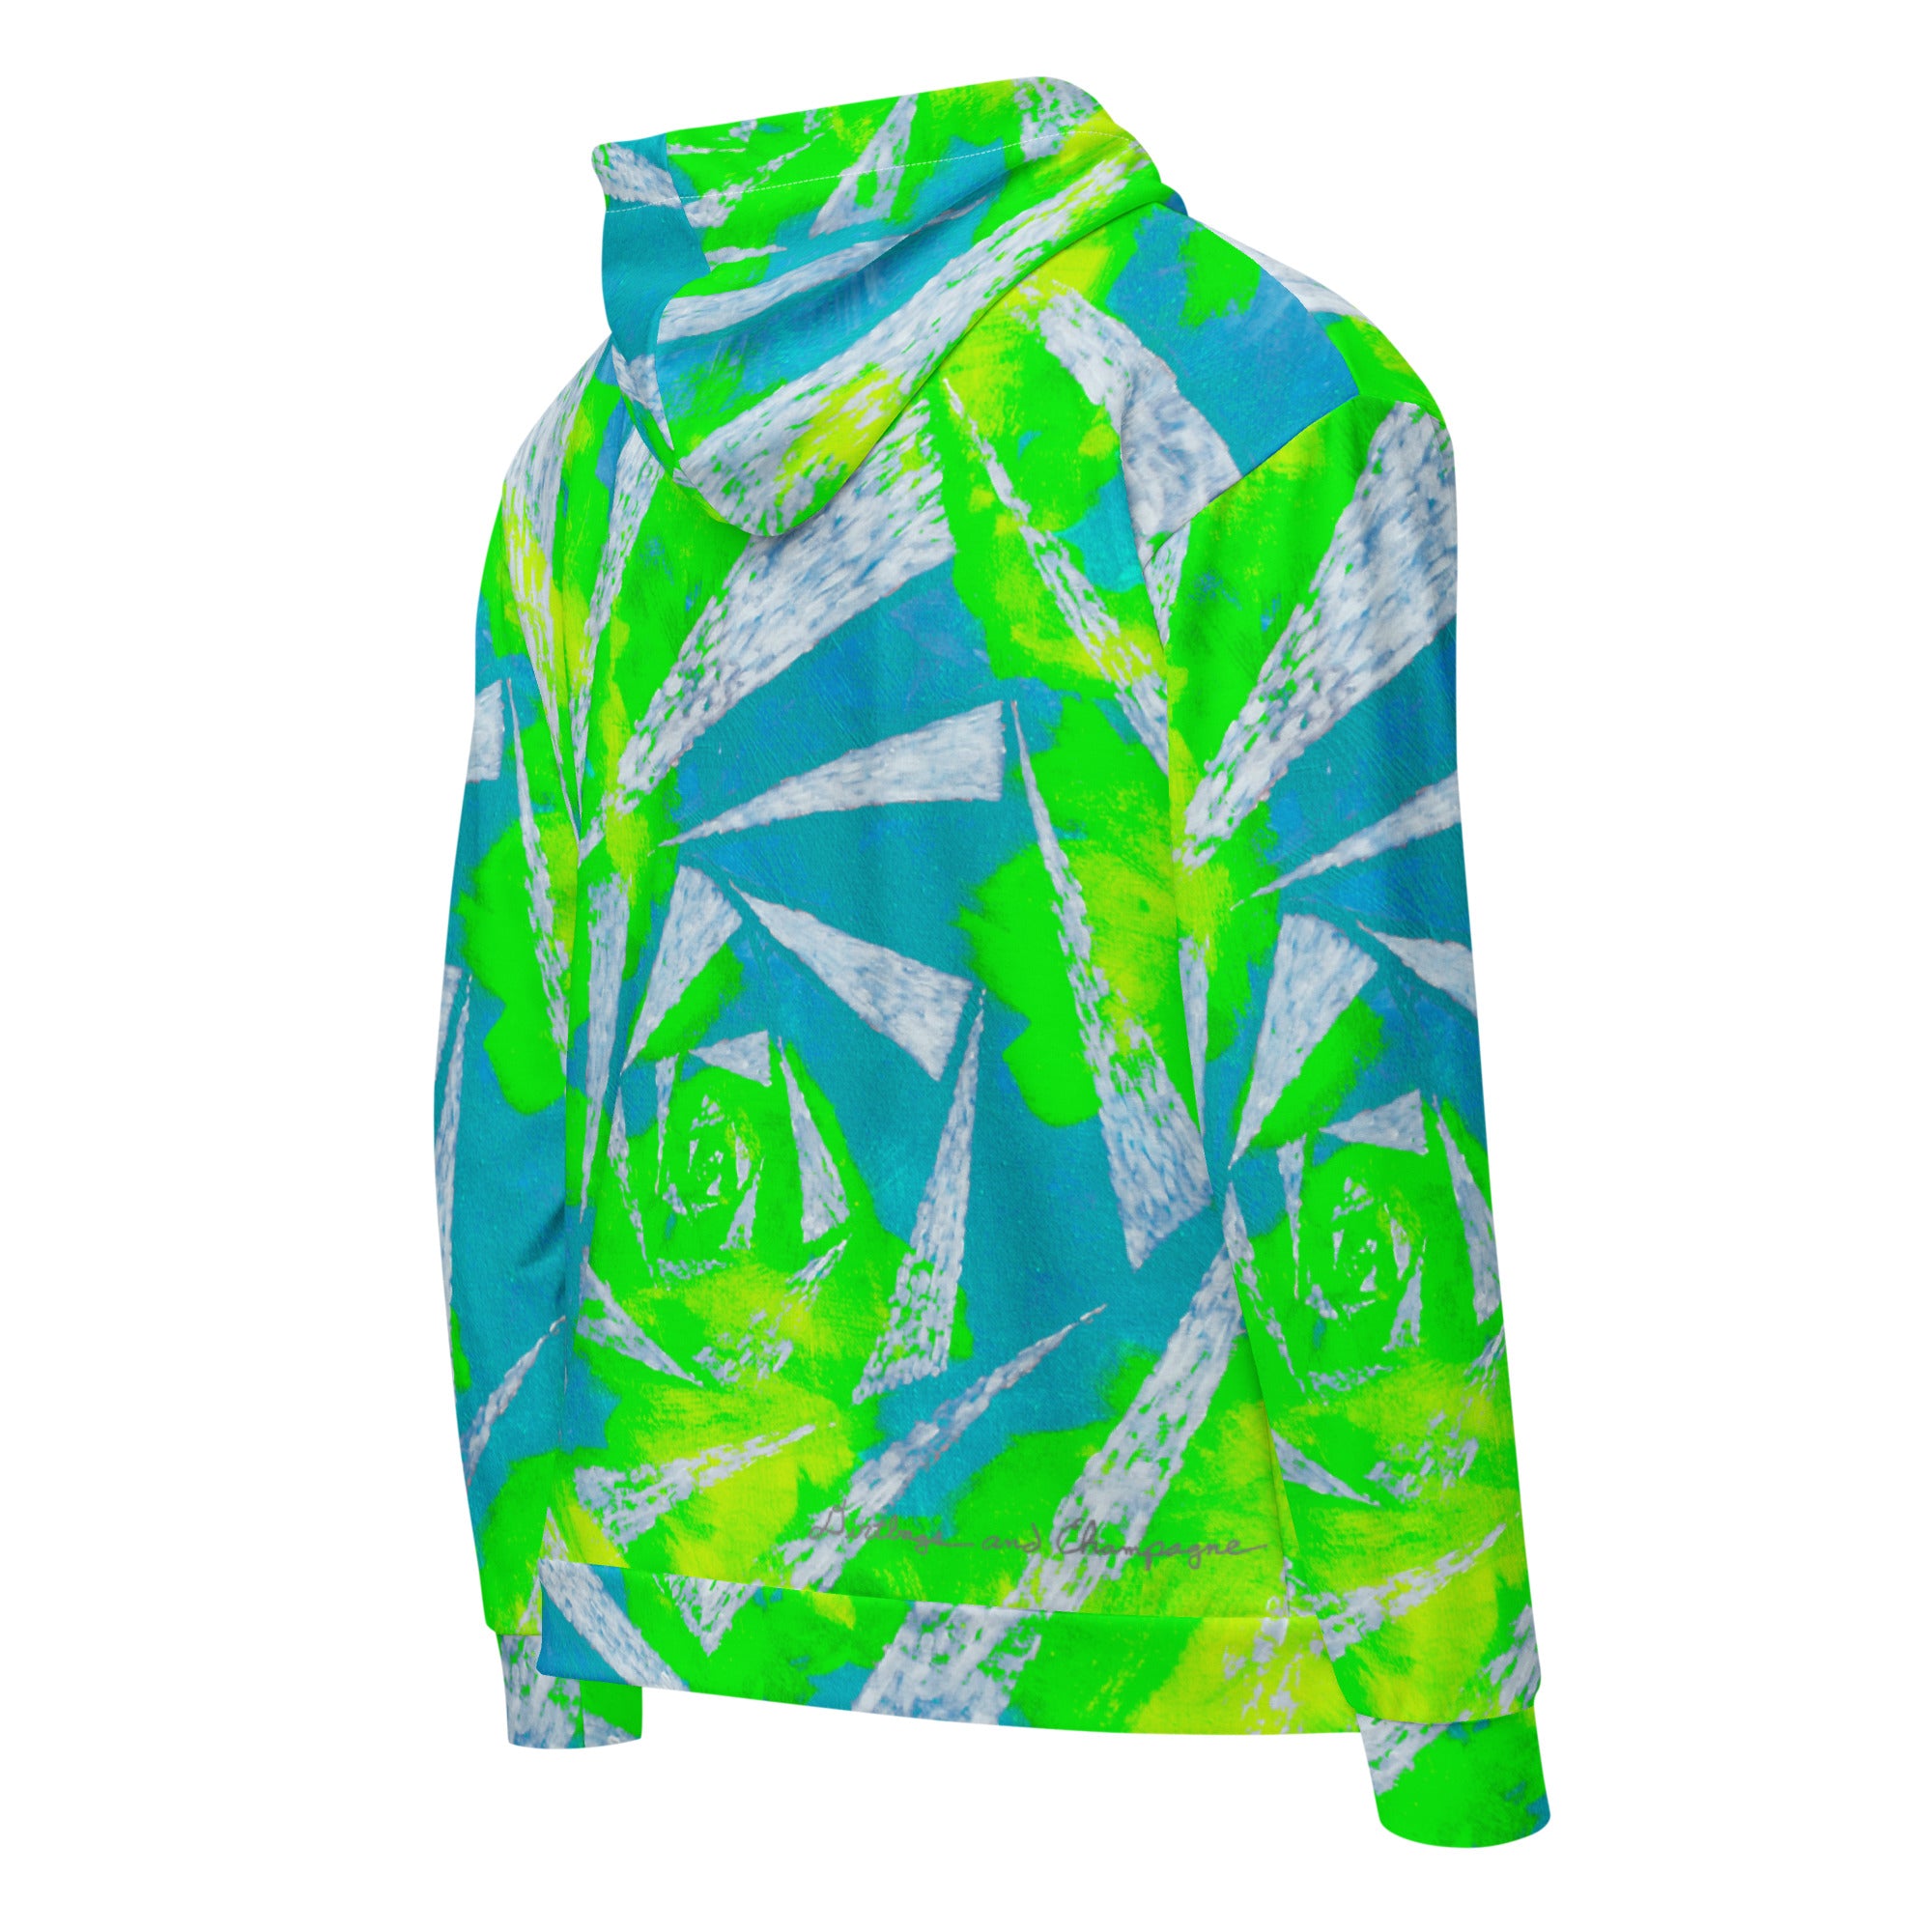 blue green and white spiral Unisex 95% recycled zip hoodie